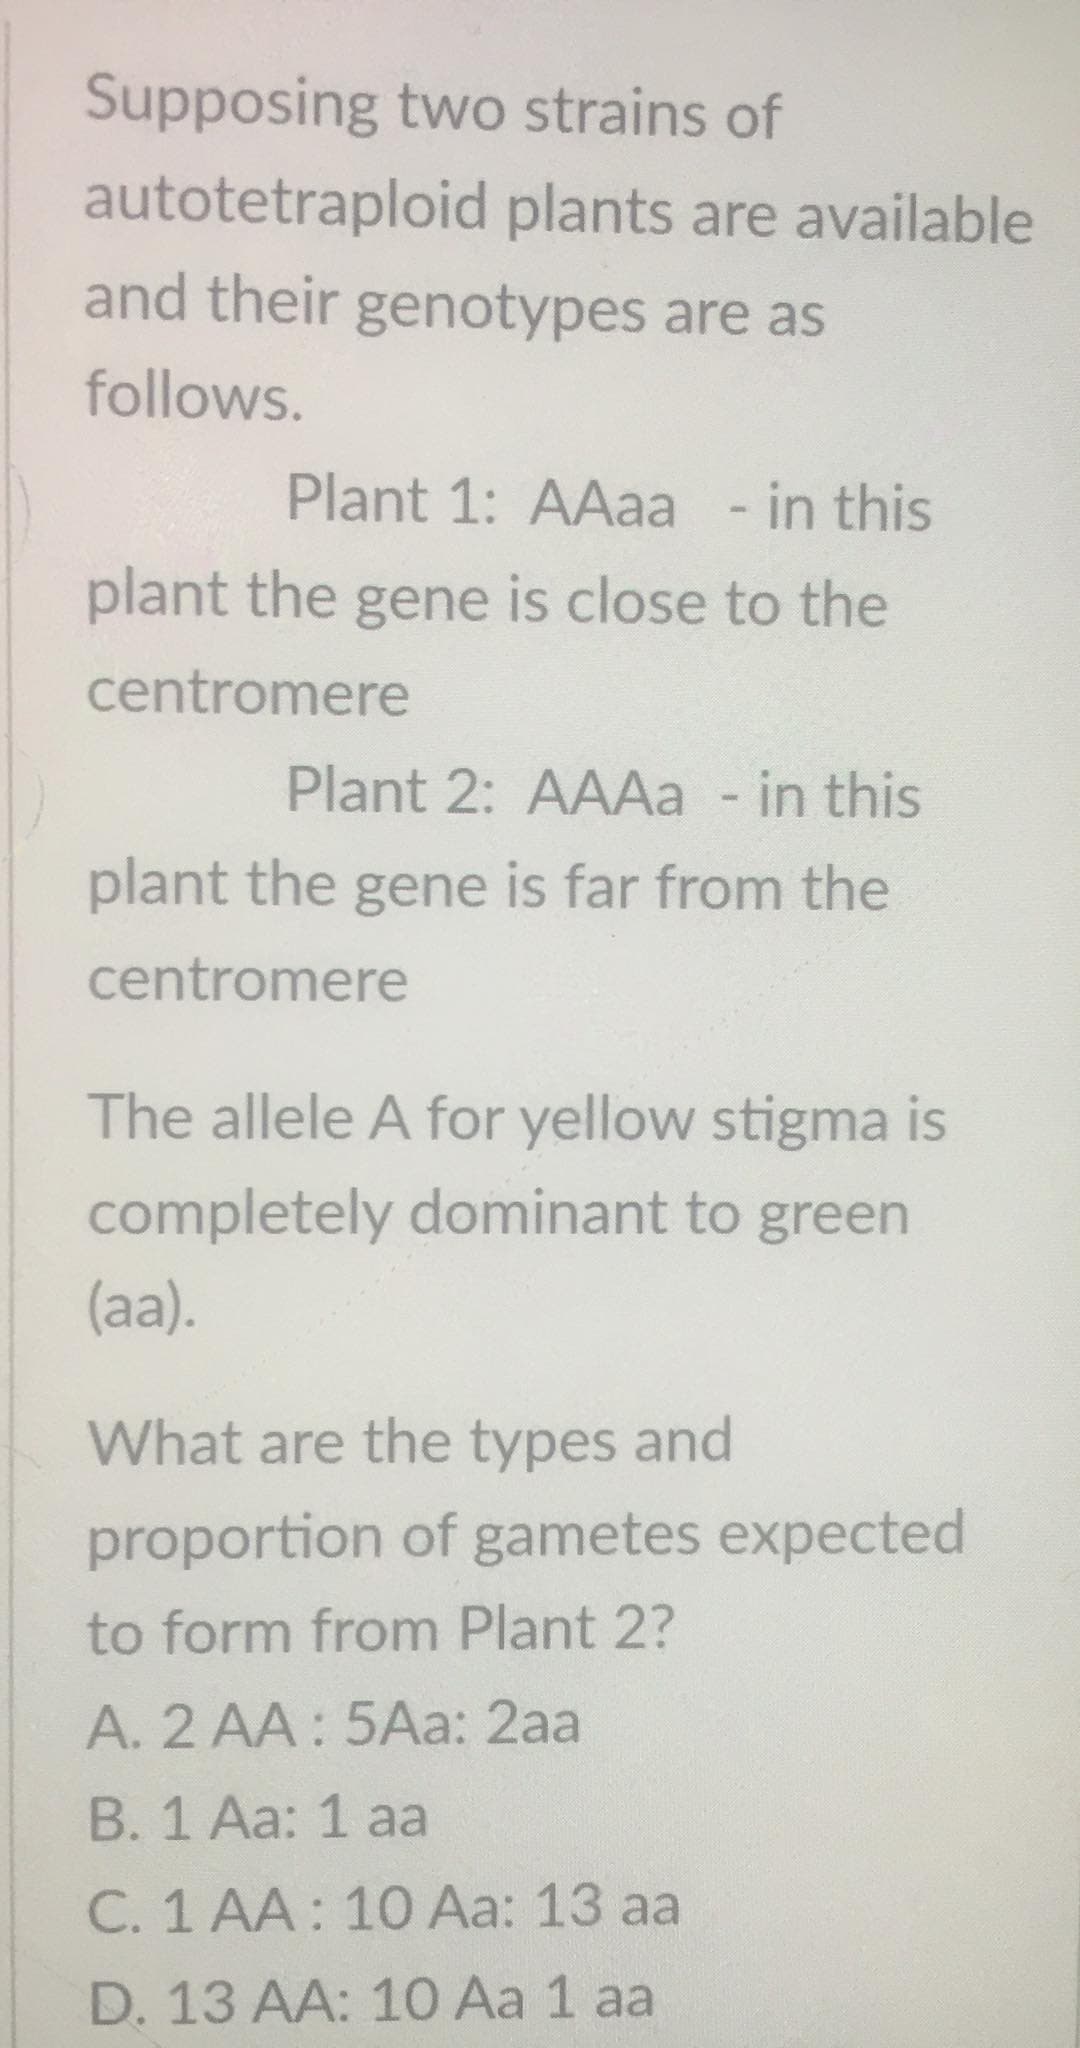 Supposing two strains of
autotetraploid plants are available
and their genotypes are as
follows.
Plant 1: AAaa - in this
plant the gene is close to the
centromere
Plant 2: AAAa - in this
plant the gene is far from the
centromere
The allele A for yellow stigma
completely dominant to green
(aa).
What are the types and
proportion of gametes expected
to form from Plant 2?
A. 2 AA: 5Aa: 2aa
B. 1 Aa: 1 aa
C. 1 AA: 10 Aa: 13 aa
D. 13 AA: 10 Aa 1 aa